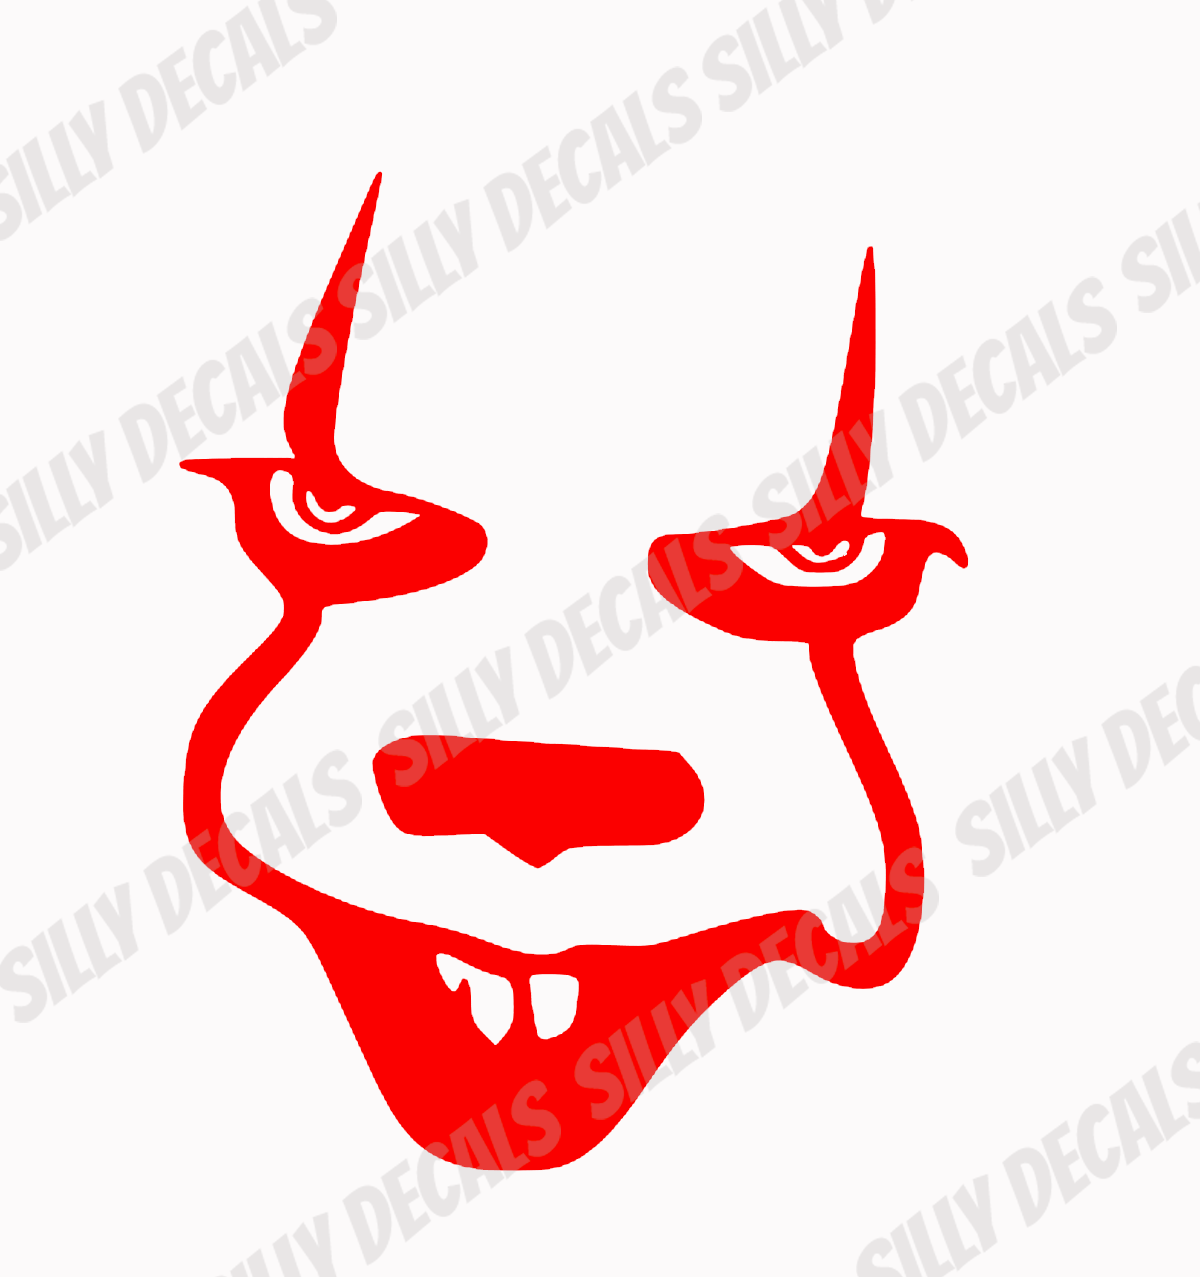 Pennywise Inspired; Halloween Horror Vinyl Decals Suitable For Cars, Windows, Walls, and More!